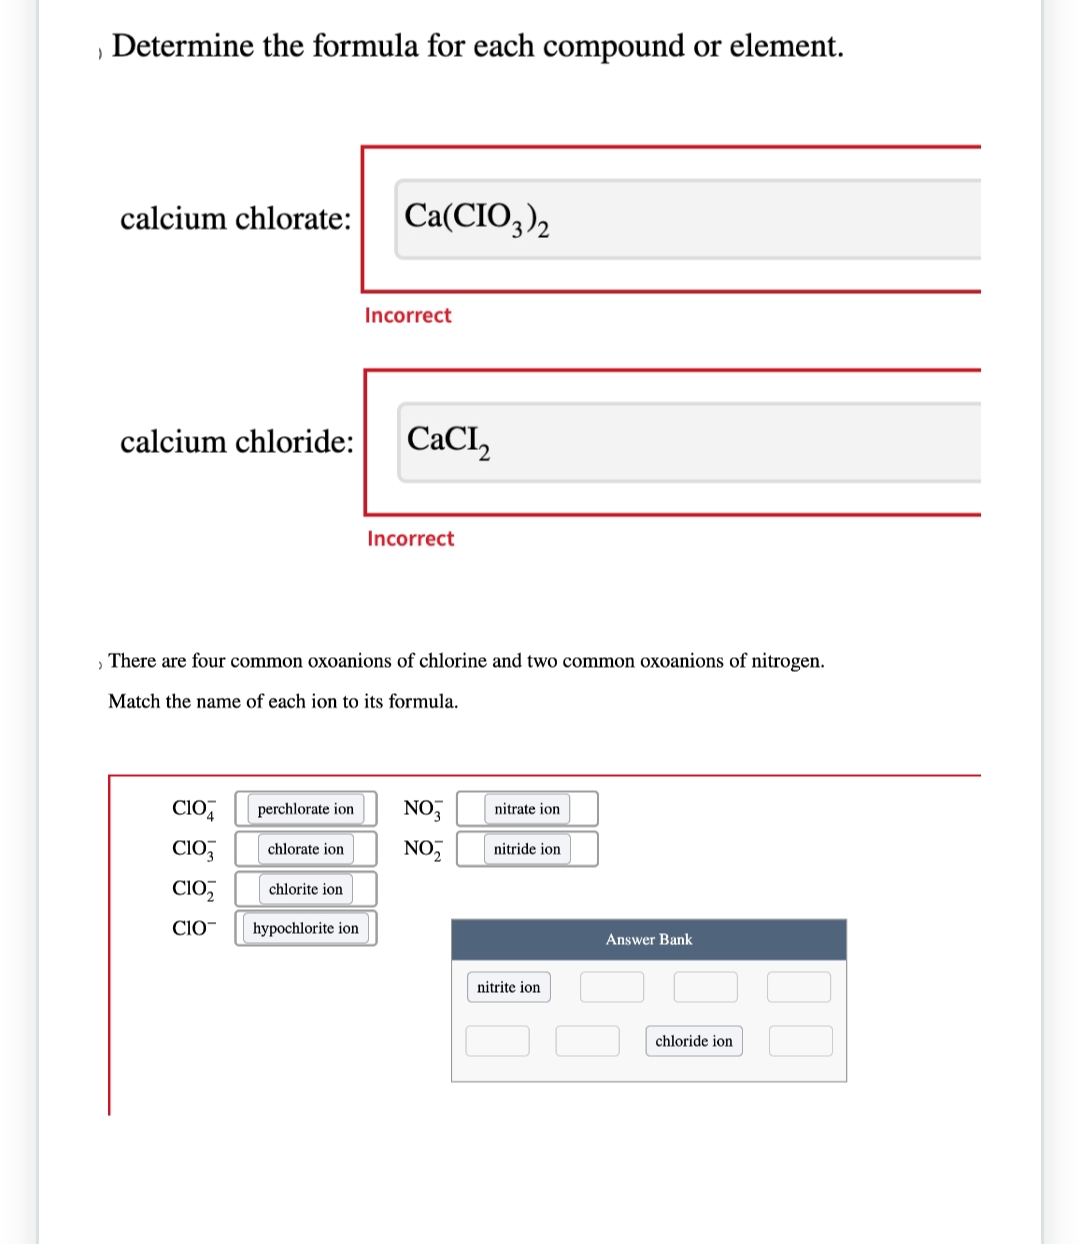 )
Determine the formula for each compound or element.
calcium chlorate: Ca(CIO3)2
calcium chloride:
CIO
CIO
CIO₂
CIO
perchlorate ion
› There are four common oxoanions of chlorine and two common oxoanions of nitrogen.
Match the name of each ion to its formula.
chlorate ion
chlorite ion
Incorrect
hypochlorite ion
CaCI,
Incorrect
NO3
NO₂
nitrate ion
nitride ion
nitrite ion
Answer Bank
chloride ion